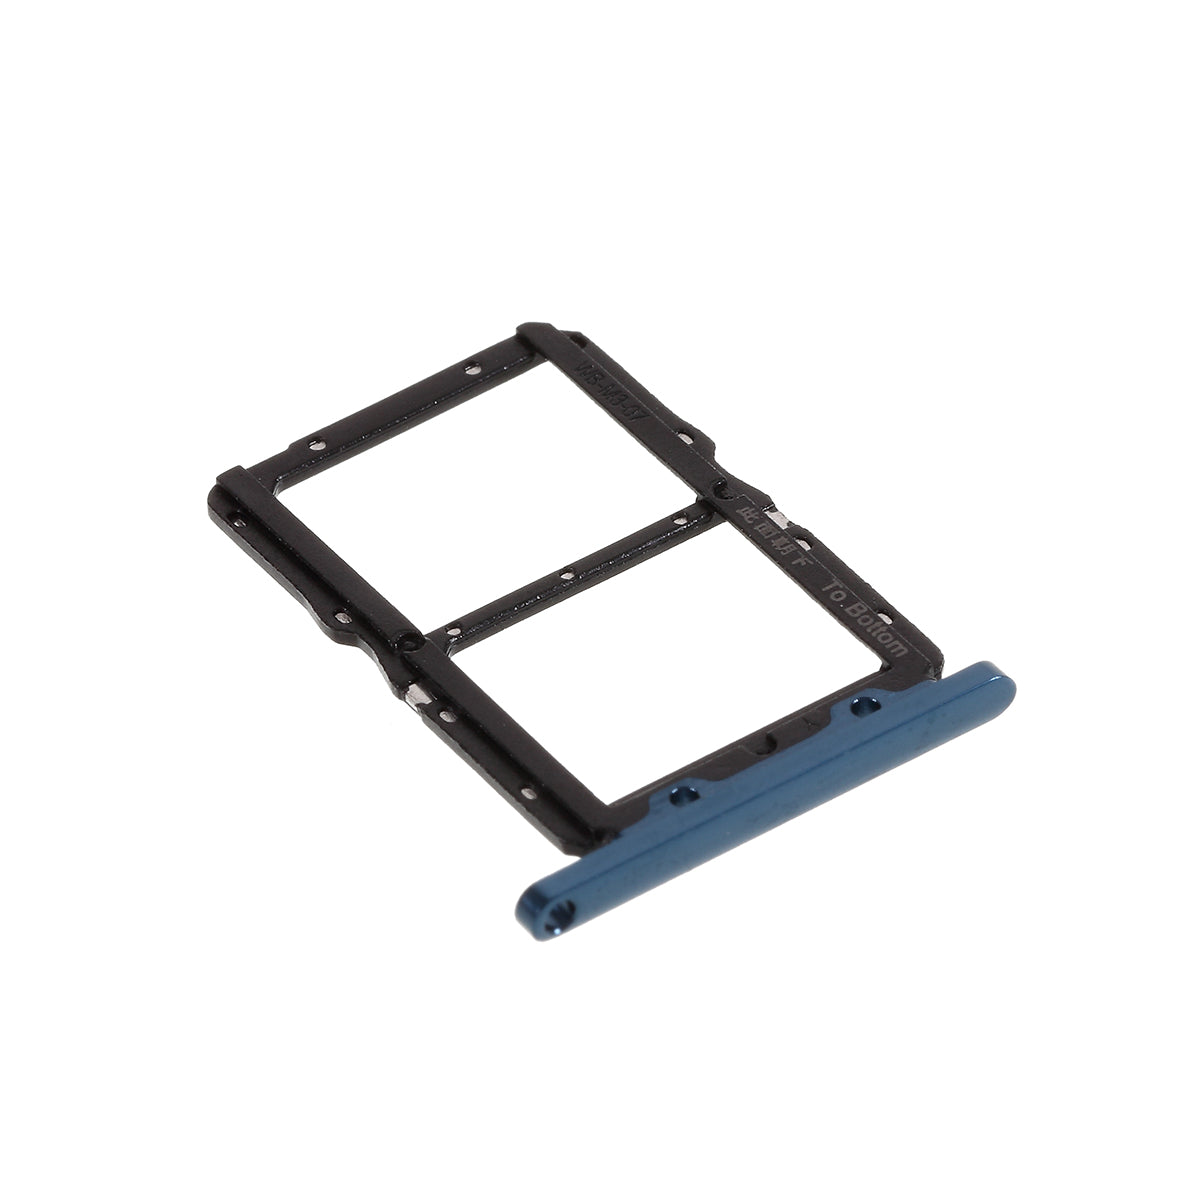 For Huawei Honor 20 / Nova 5T YAL-L21 OEM Dual SIM Card Tray Holder Replace Part (without Logo) - Dark Blue